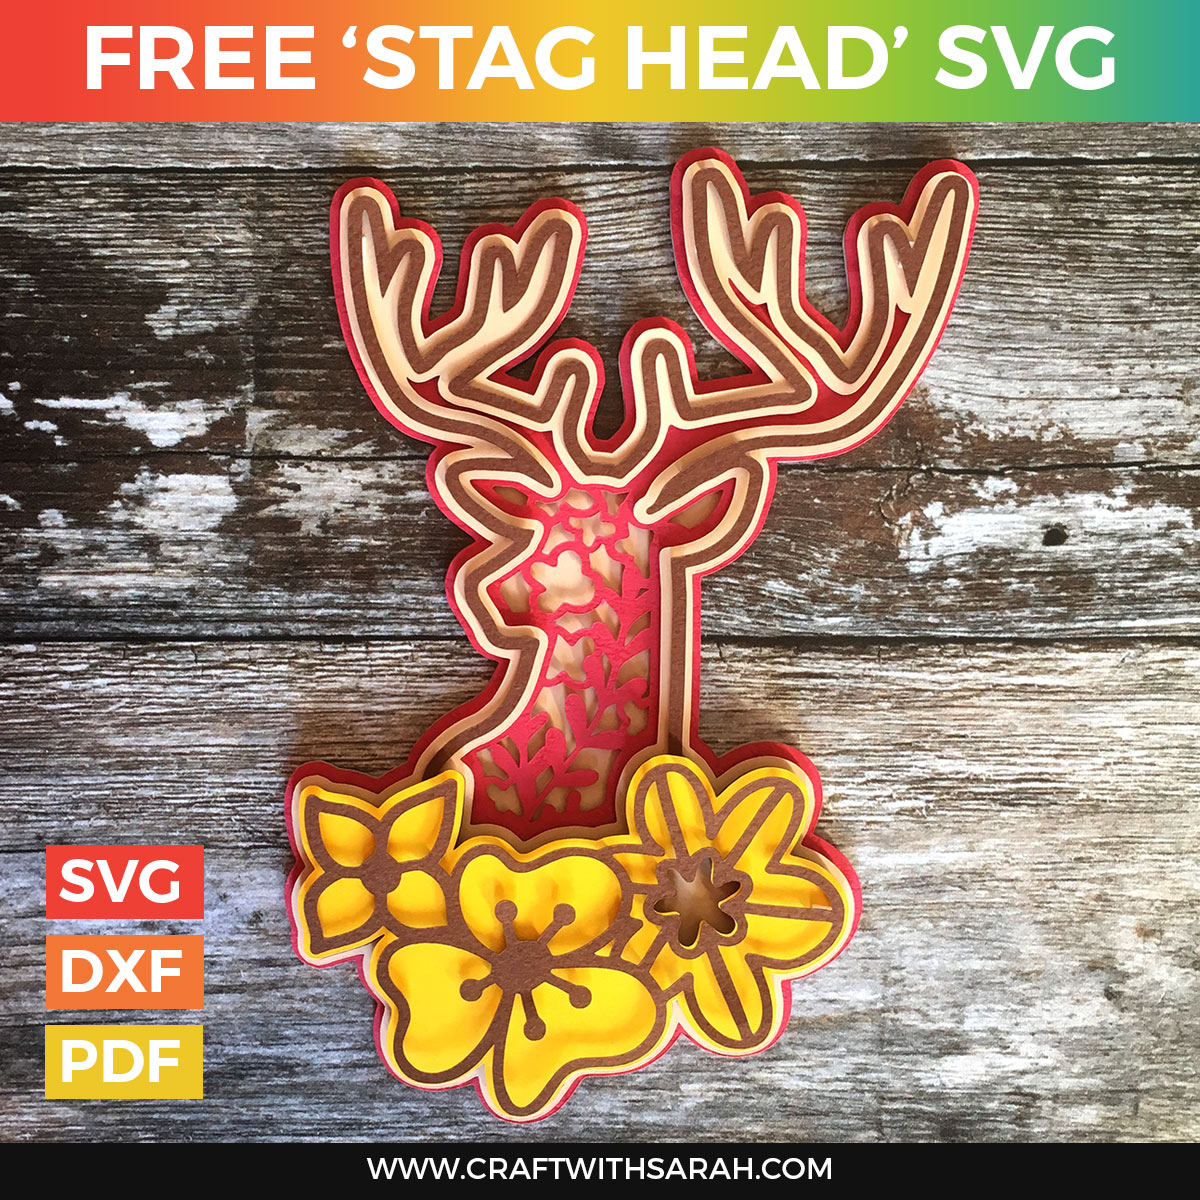 Download Stag Head Layered Svg Craft With Sarah